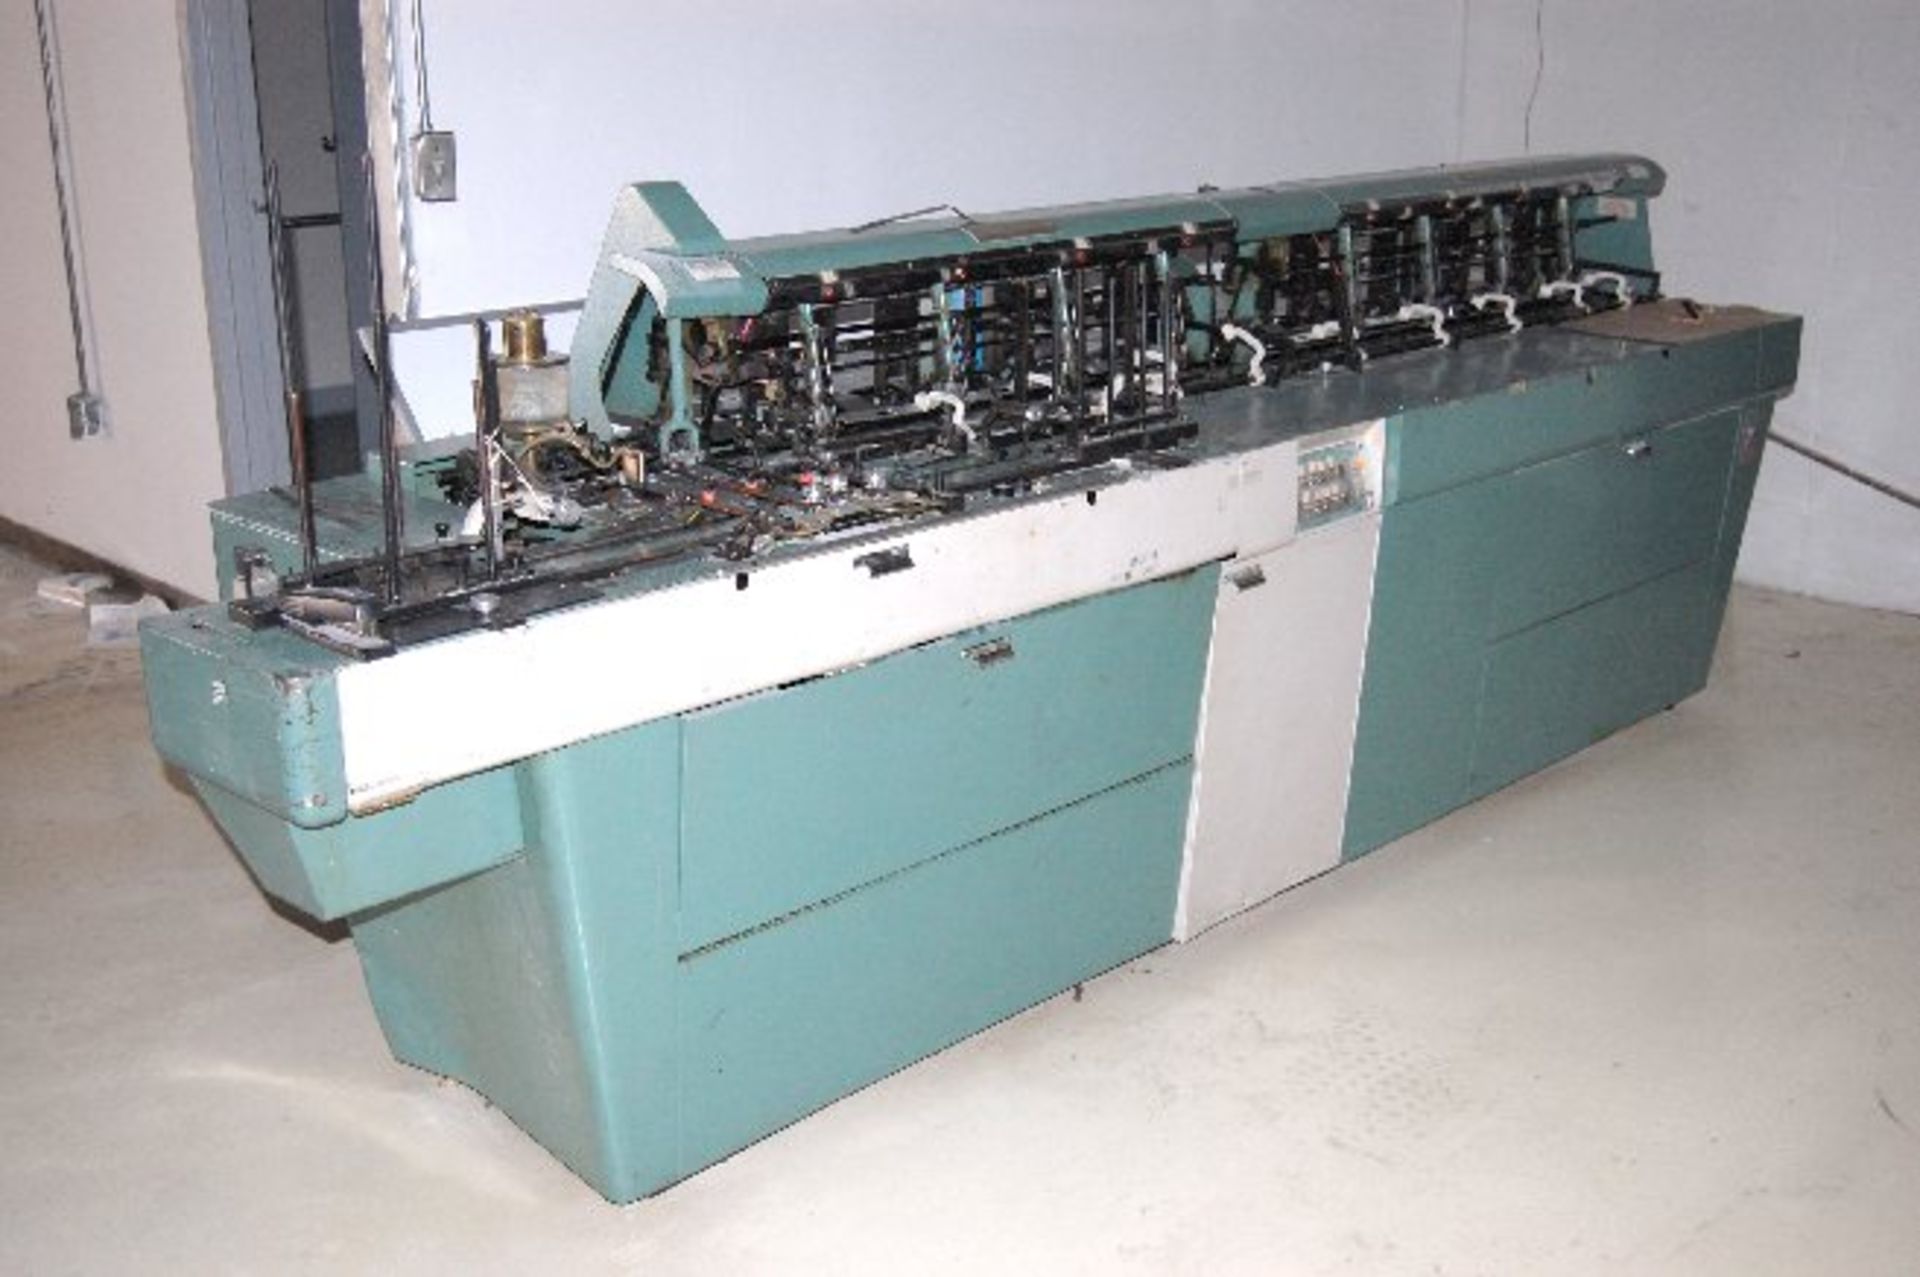 BELL & HOWELL PHILLIPSBURG COMPANY INSERTING & SEALING MACHINE Mdl A340-C8, S/N 193022